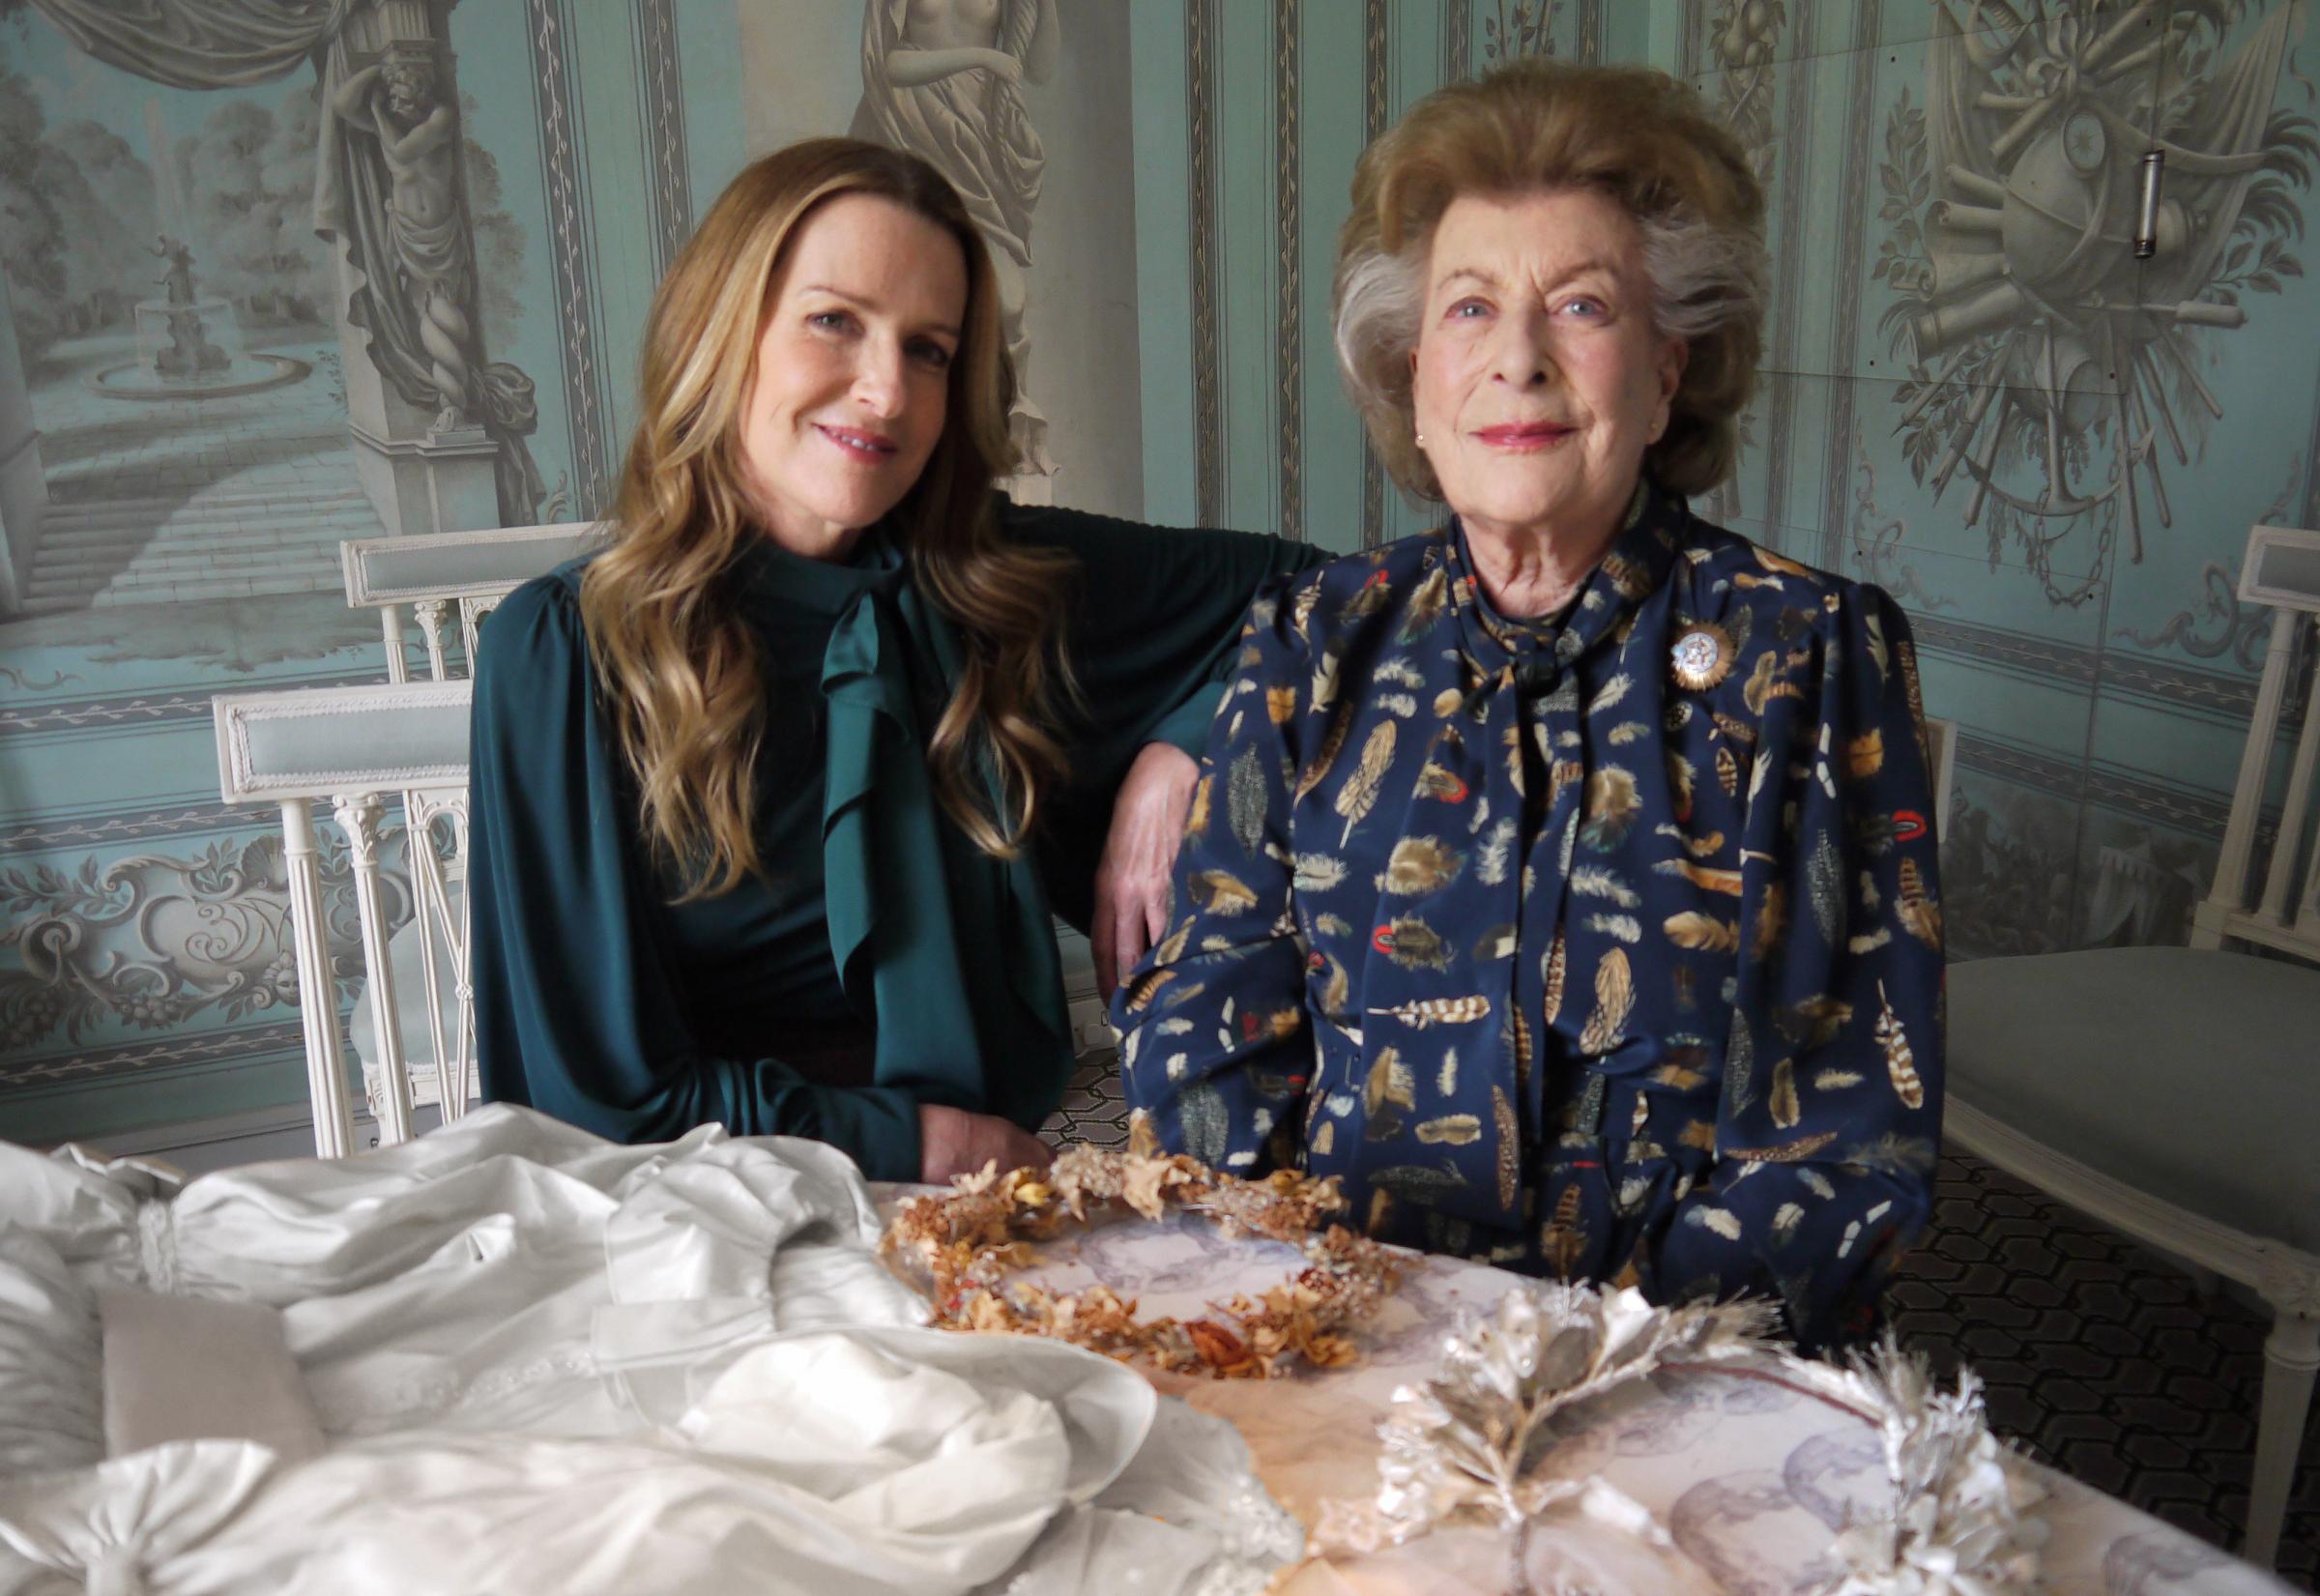 India Hicks with her mother Lady Pamela Hicks compare their respective bridesmaids dresses at Lady Pamelas home in Oxfordshire.